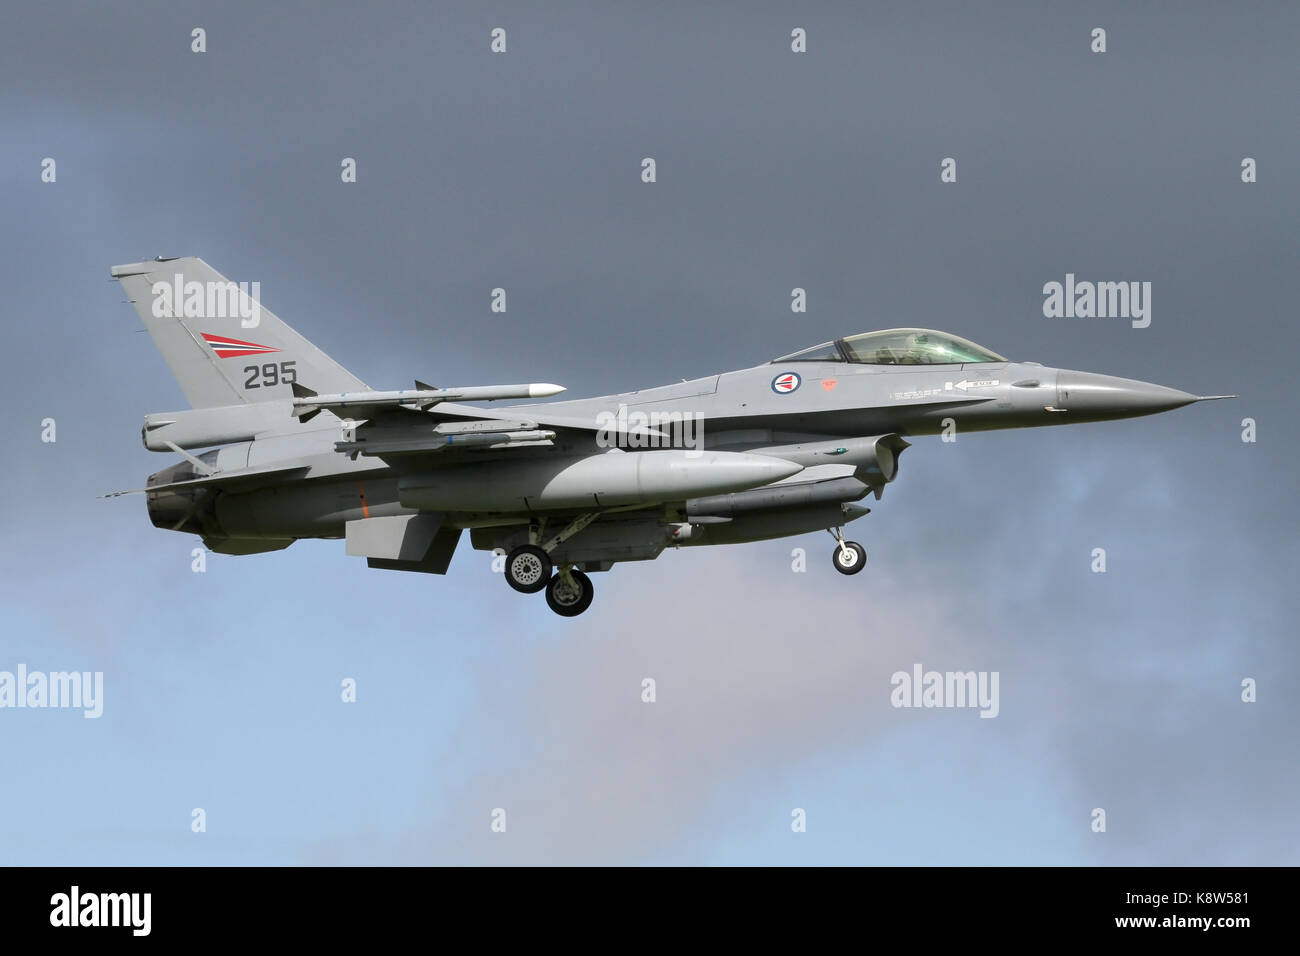 Royal Norwegian Air Force F-16AM landing at the Dutch Air Force base at Leeuwarden during exercise Frisian Flag. Stock Photo